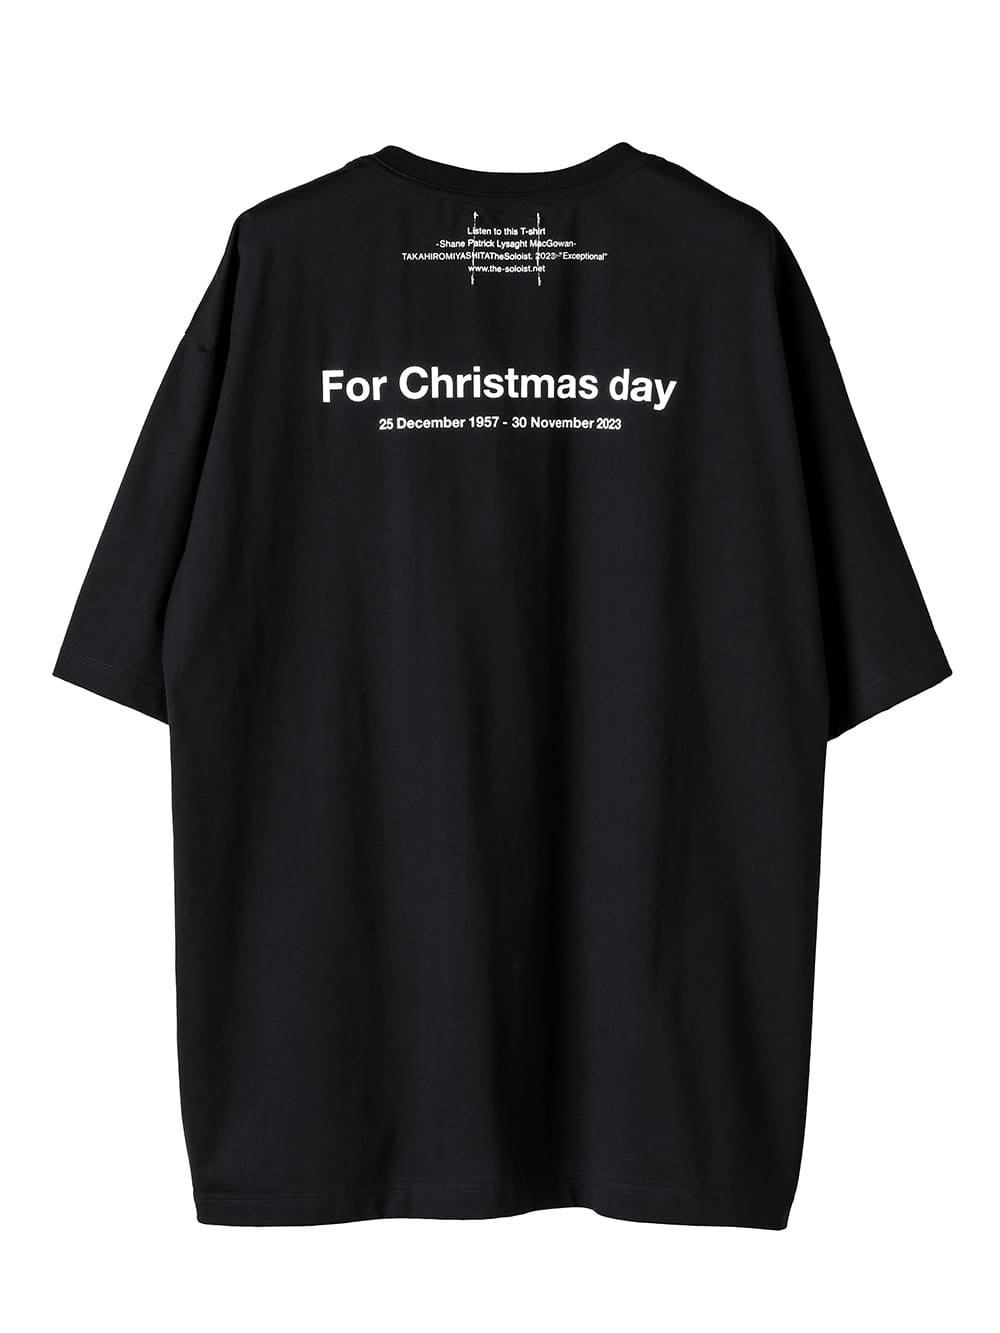 For Christmas day.(oversized s/s pocket tee)